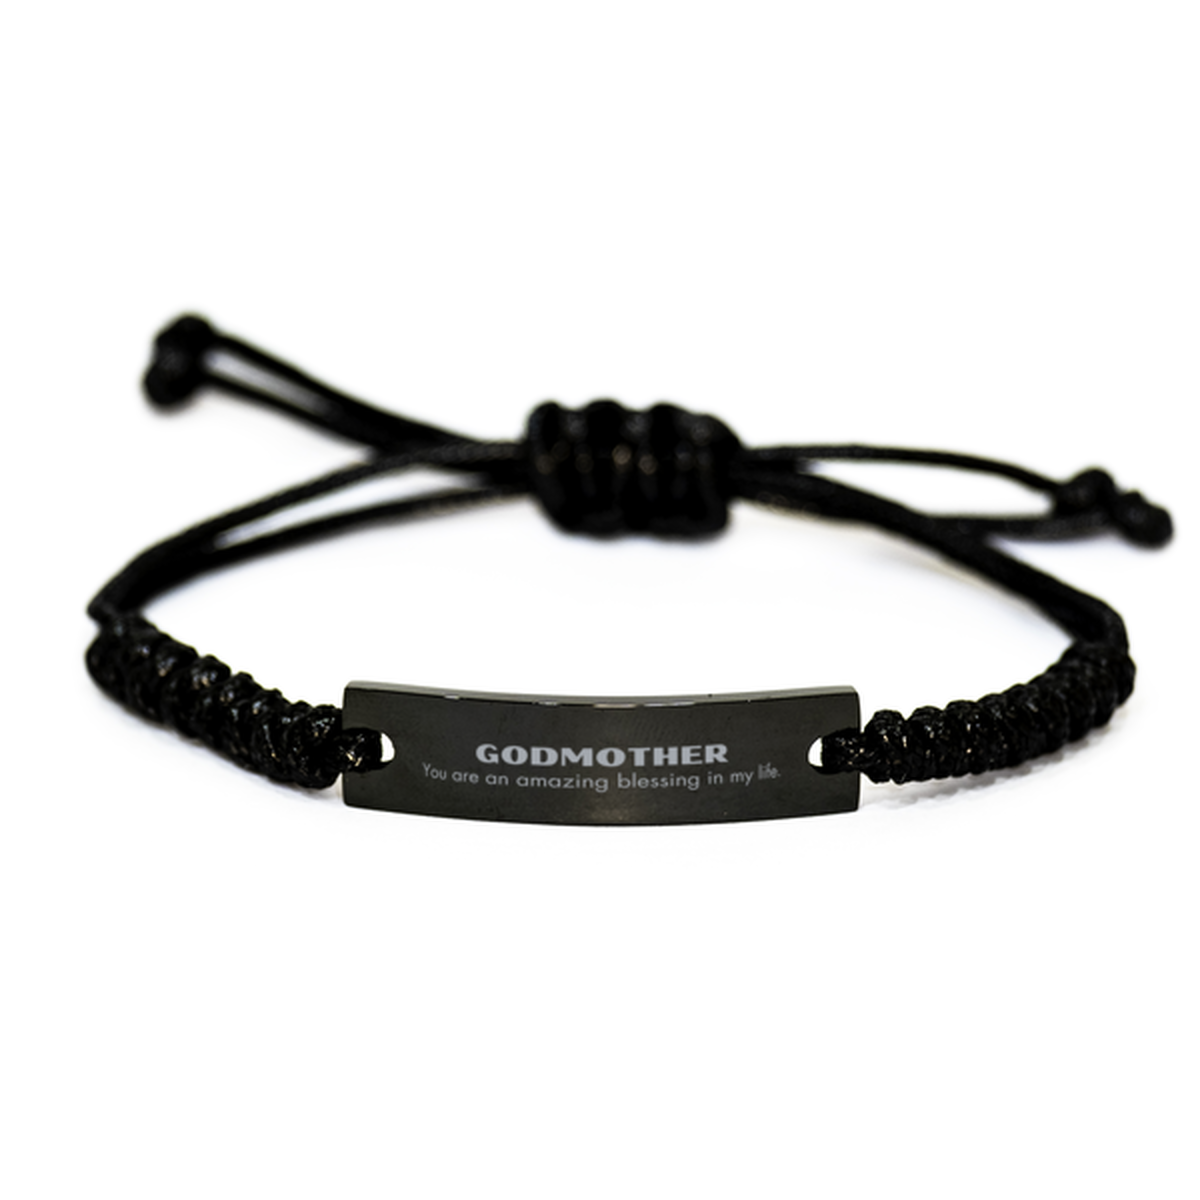 Godmother Black Rope Bracelet, You are an amazing blessing in my life, Thank You Gifts For Godmother, Inspirational Birthday Christmas Unique Gifts For Godmother